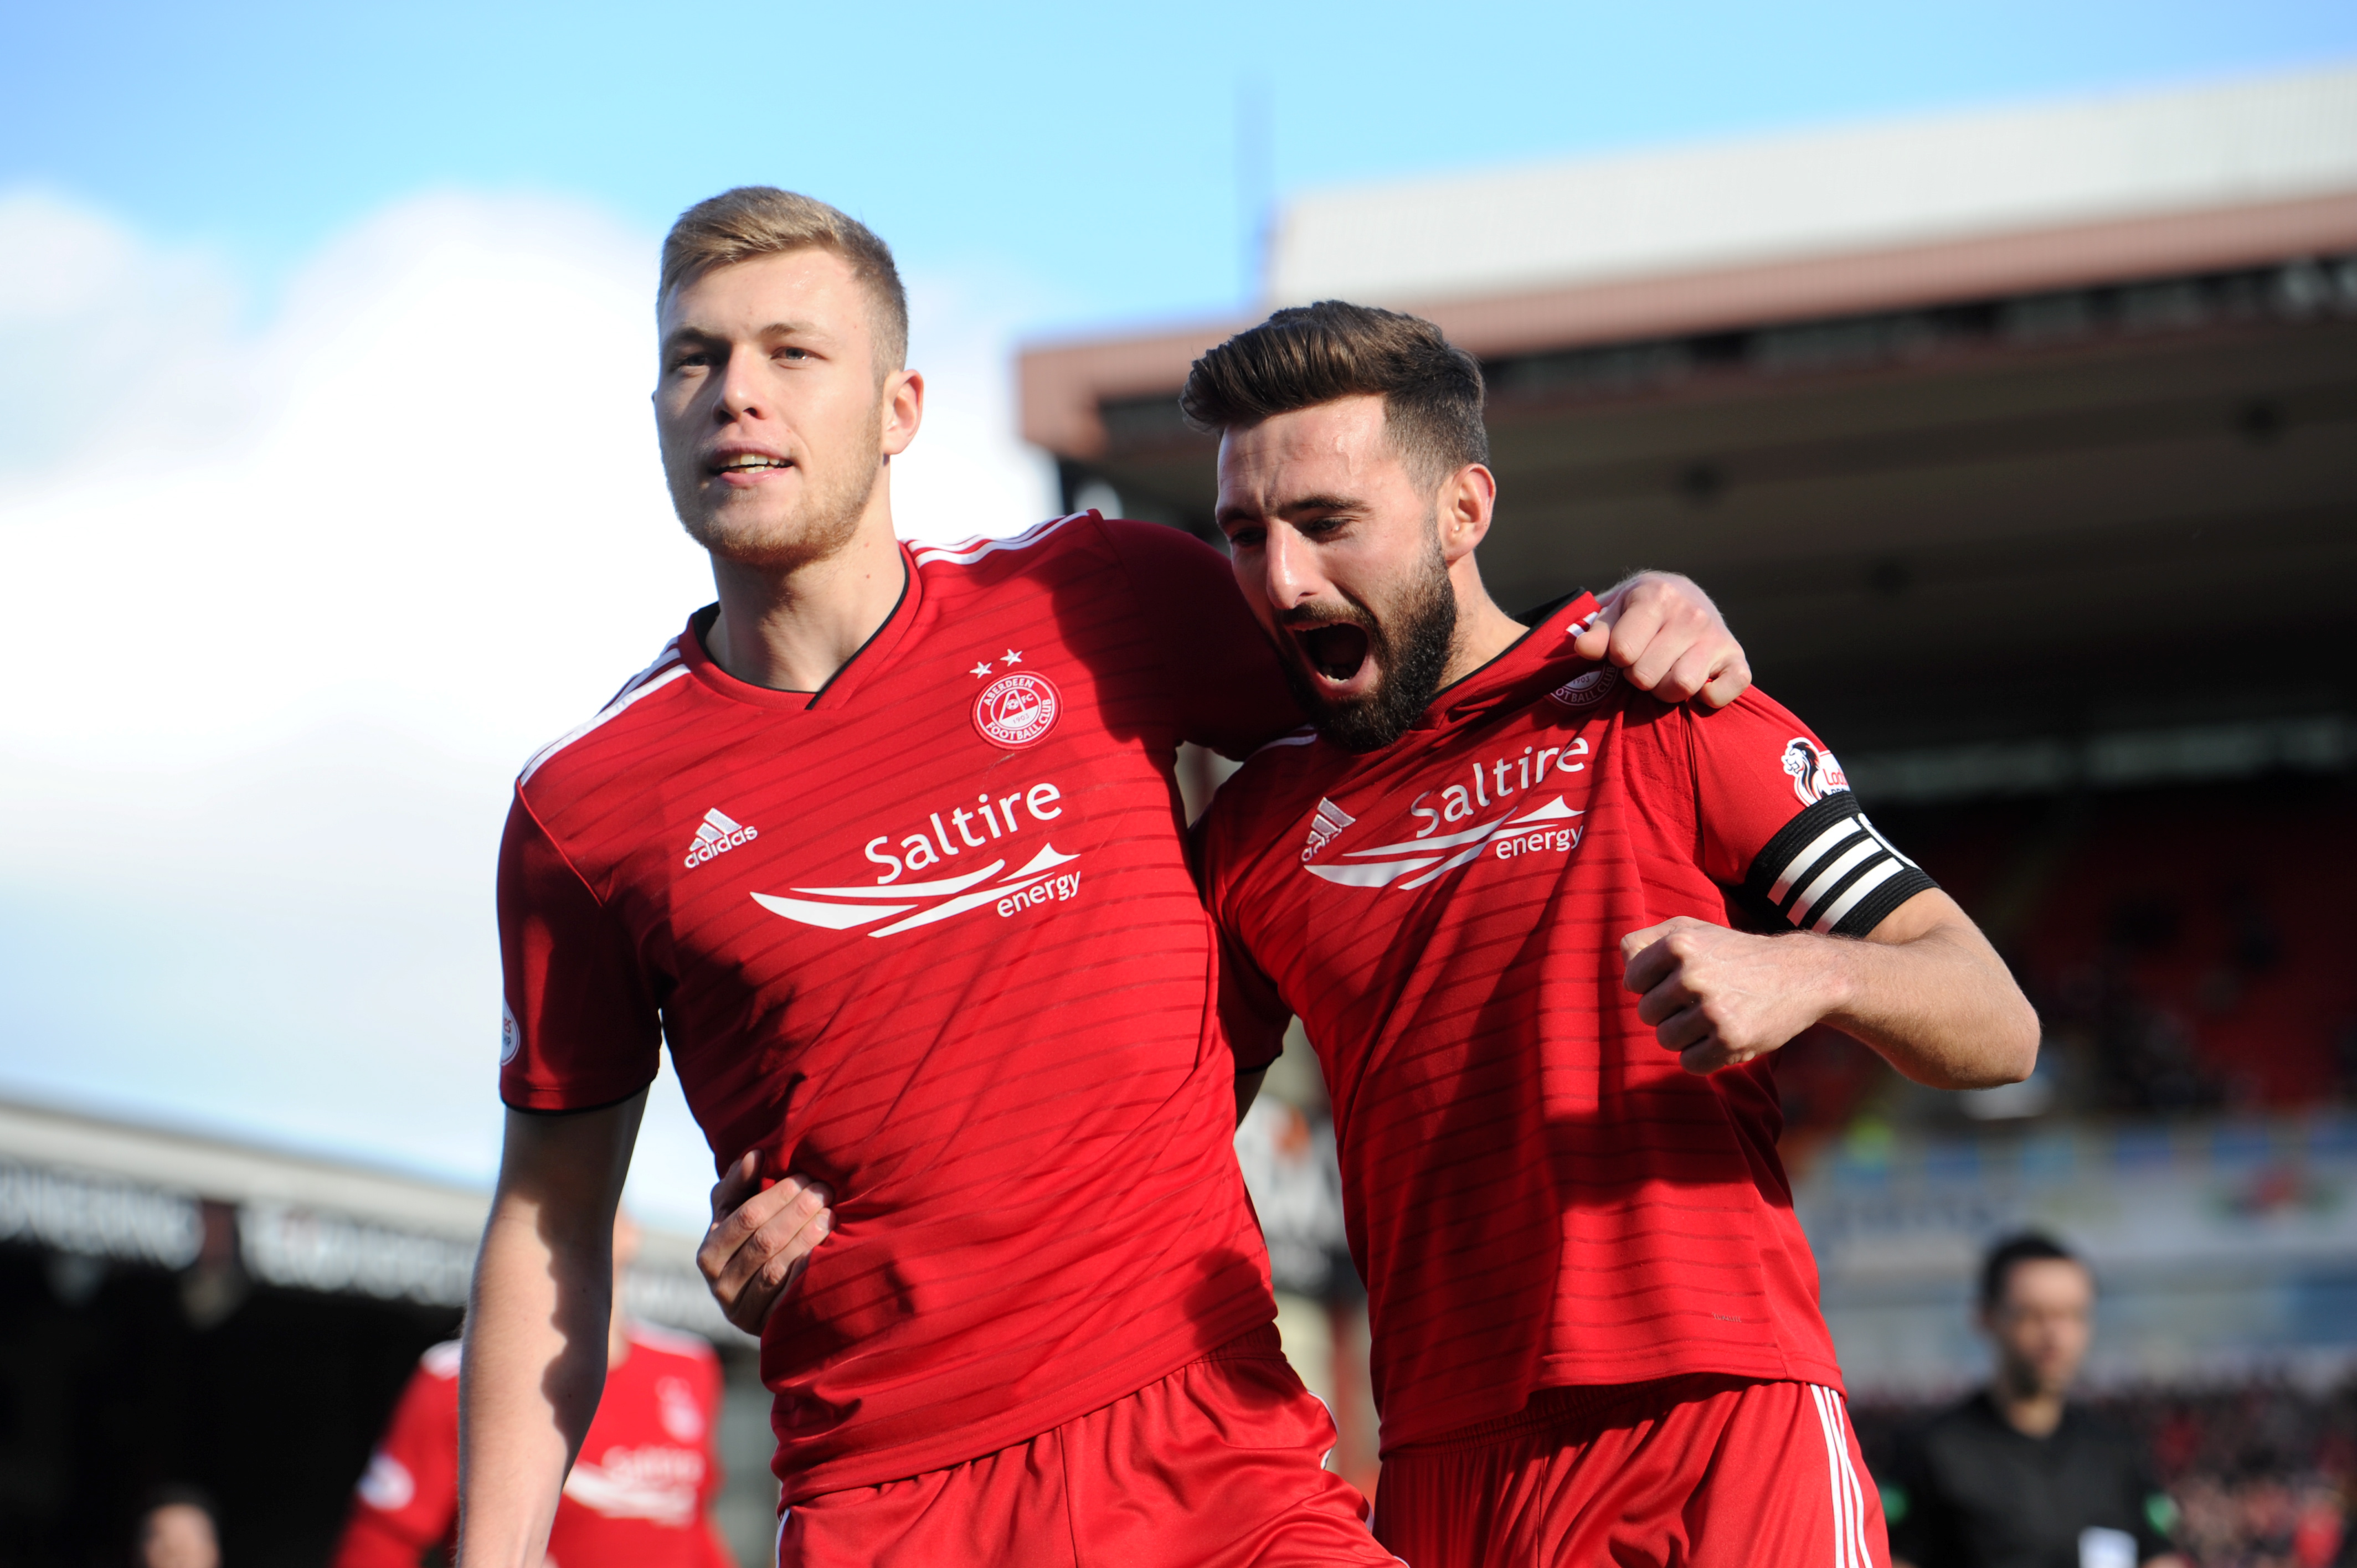 Aberdeen's Sam Cosgrove celebrates his goal with Graeme Shinnie after he scored from the penalty spot to put the Dons ahead